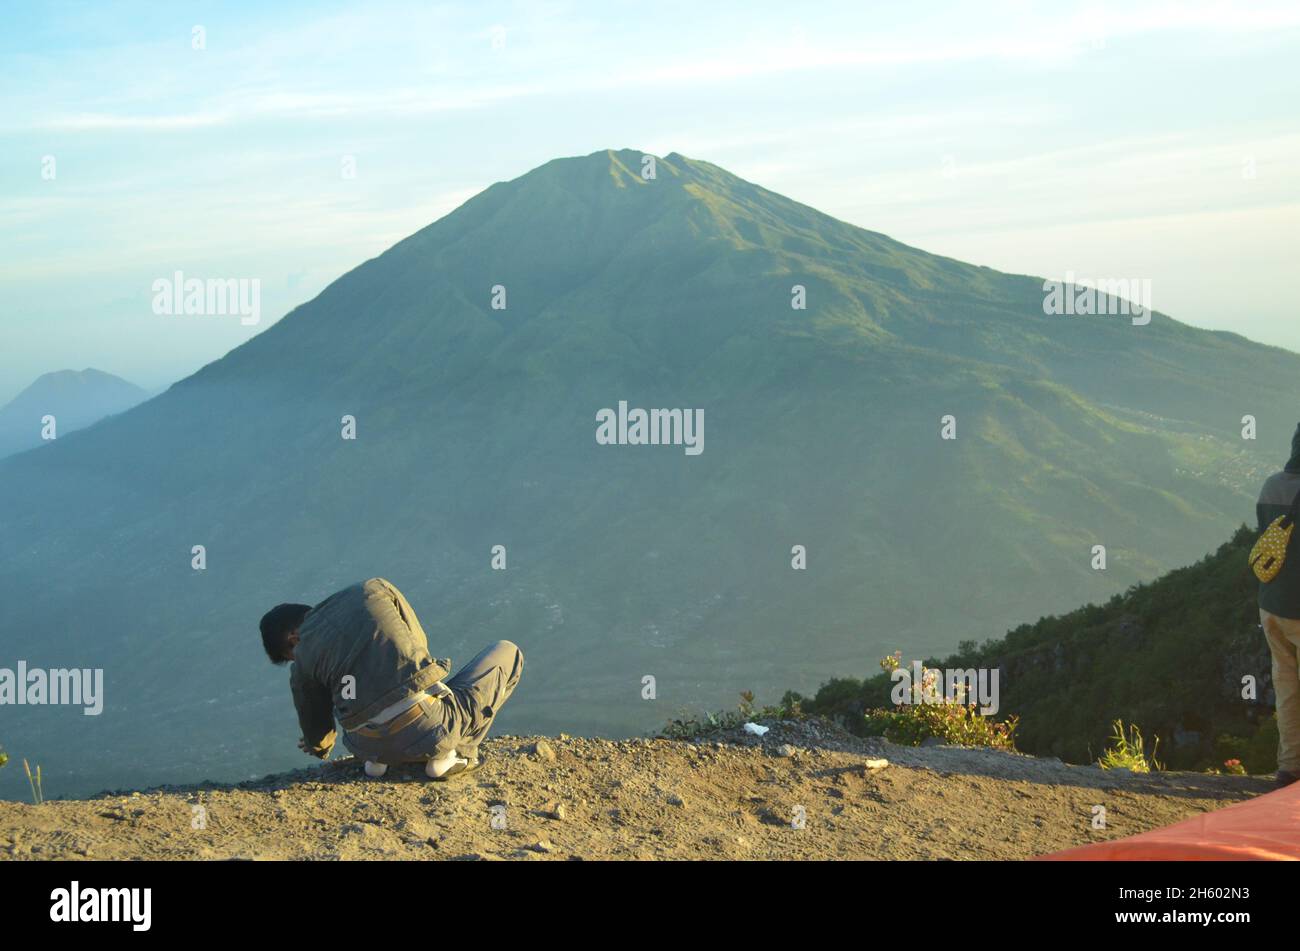 Boyolali, Indonesia. 16 may 2015. Climbing Mount Merapi for the last time. Stock Photo